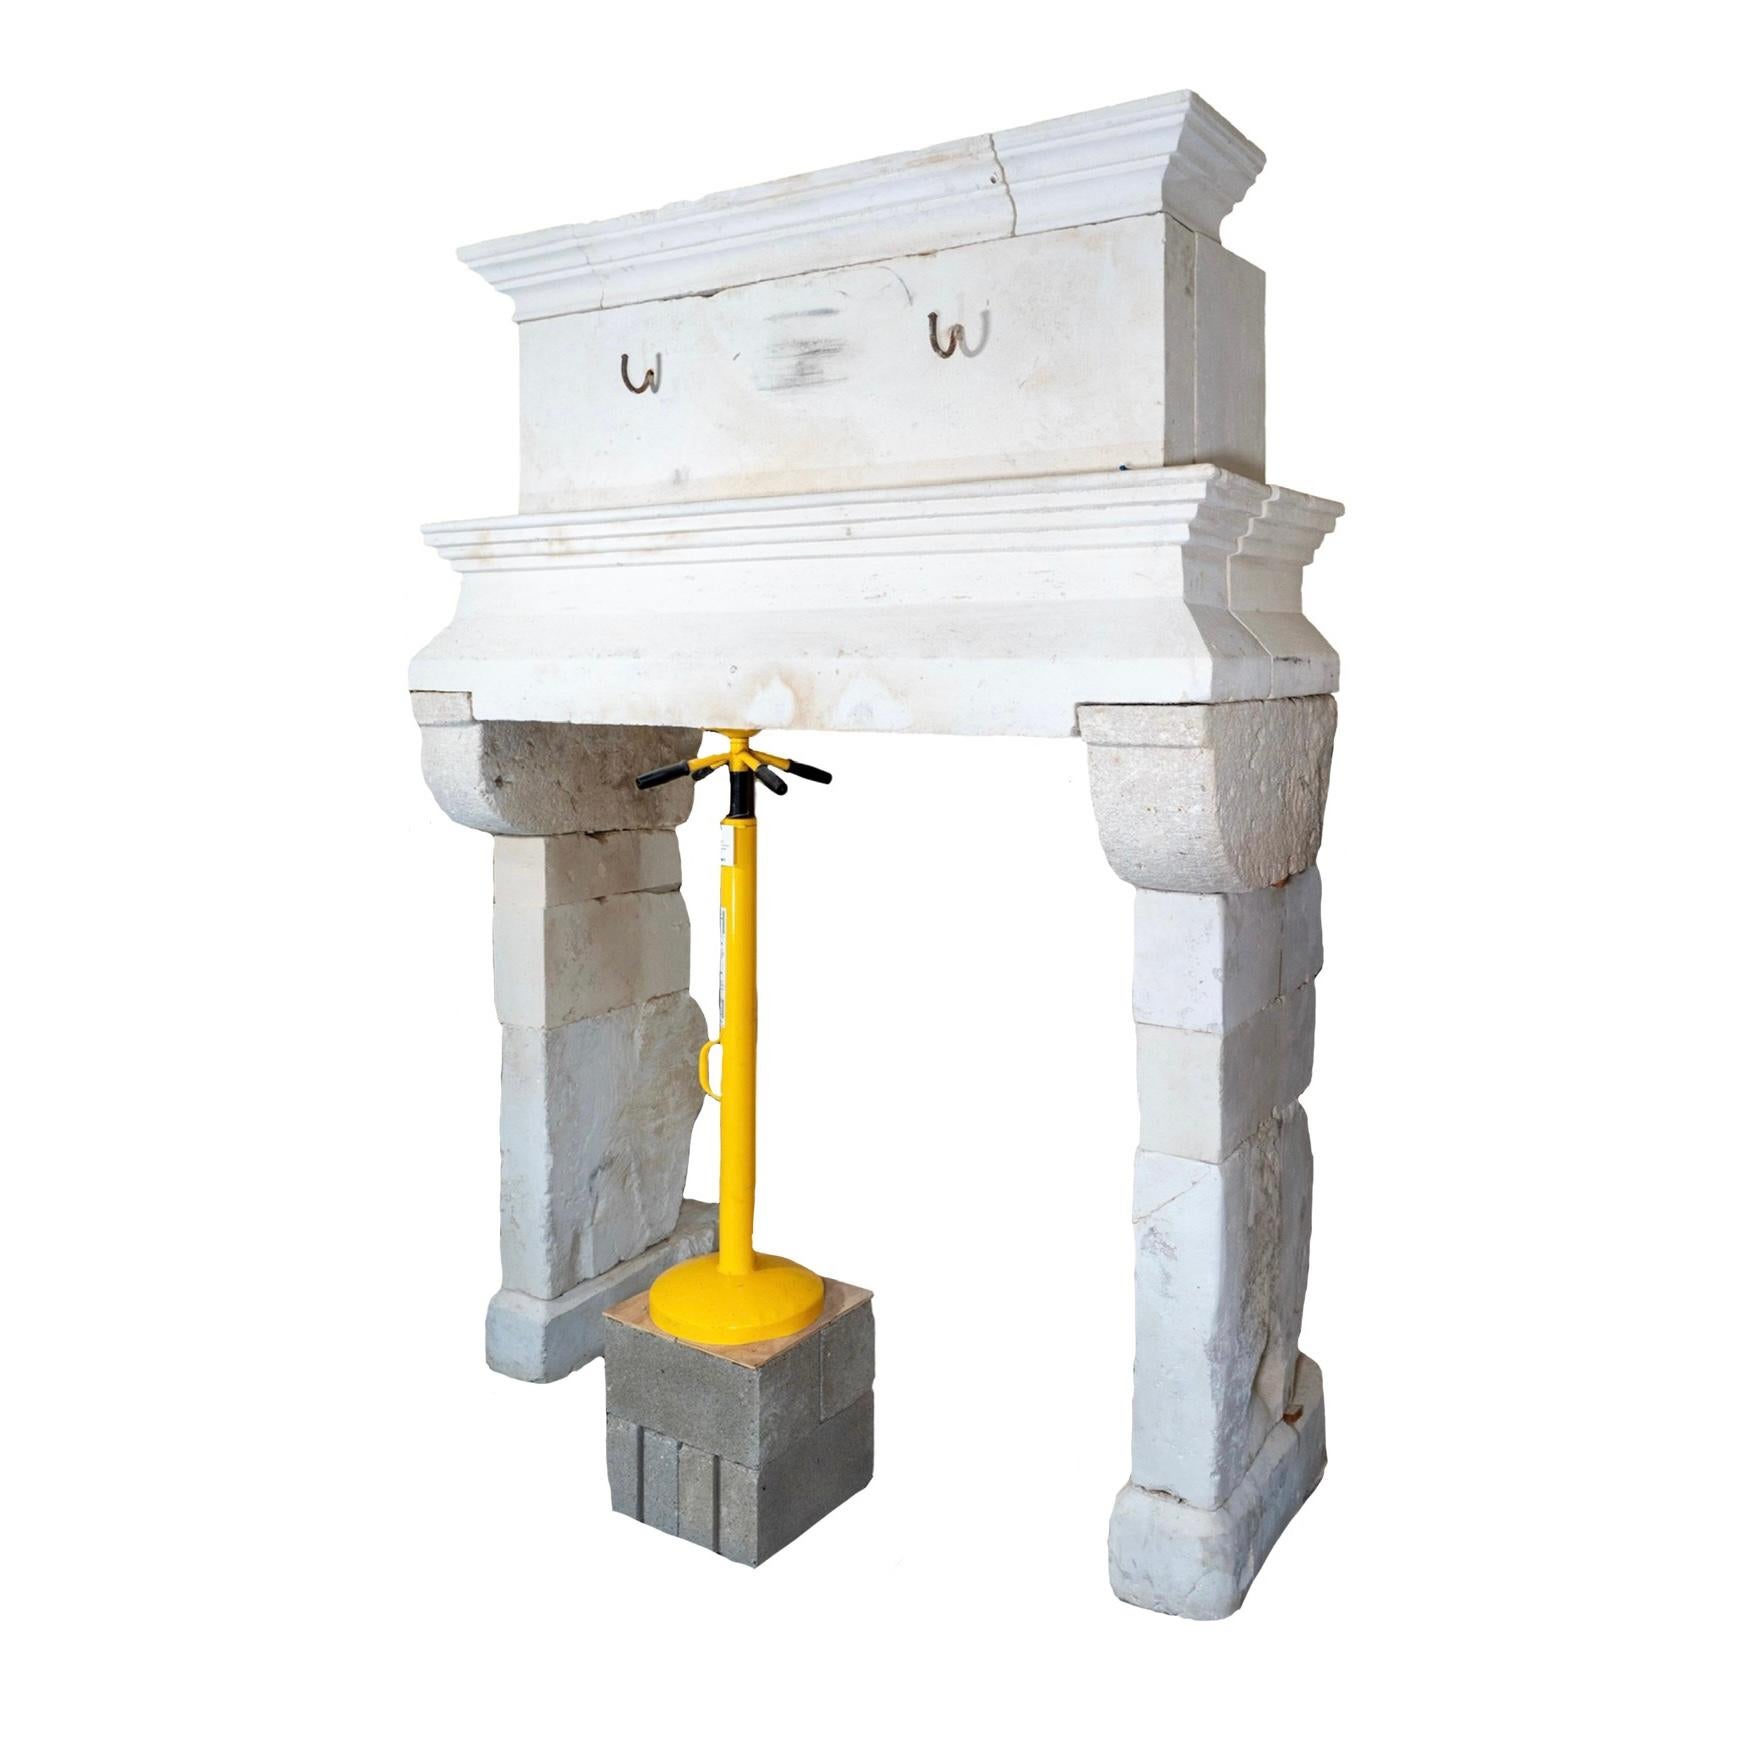 This antique French Limestone Fireplace Mantel dates back to the 1680s and has been reclaimed for modern use. Featuring iron hooks at the center of the mantel top for hanging pots and pans, this mantel is a historical piece that adds both beauty and